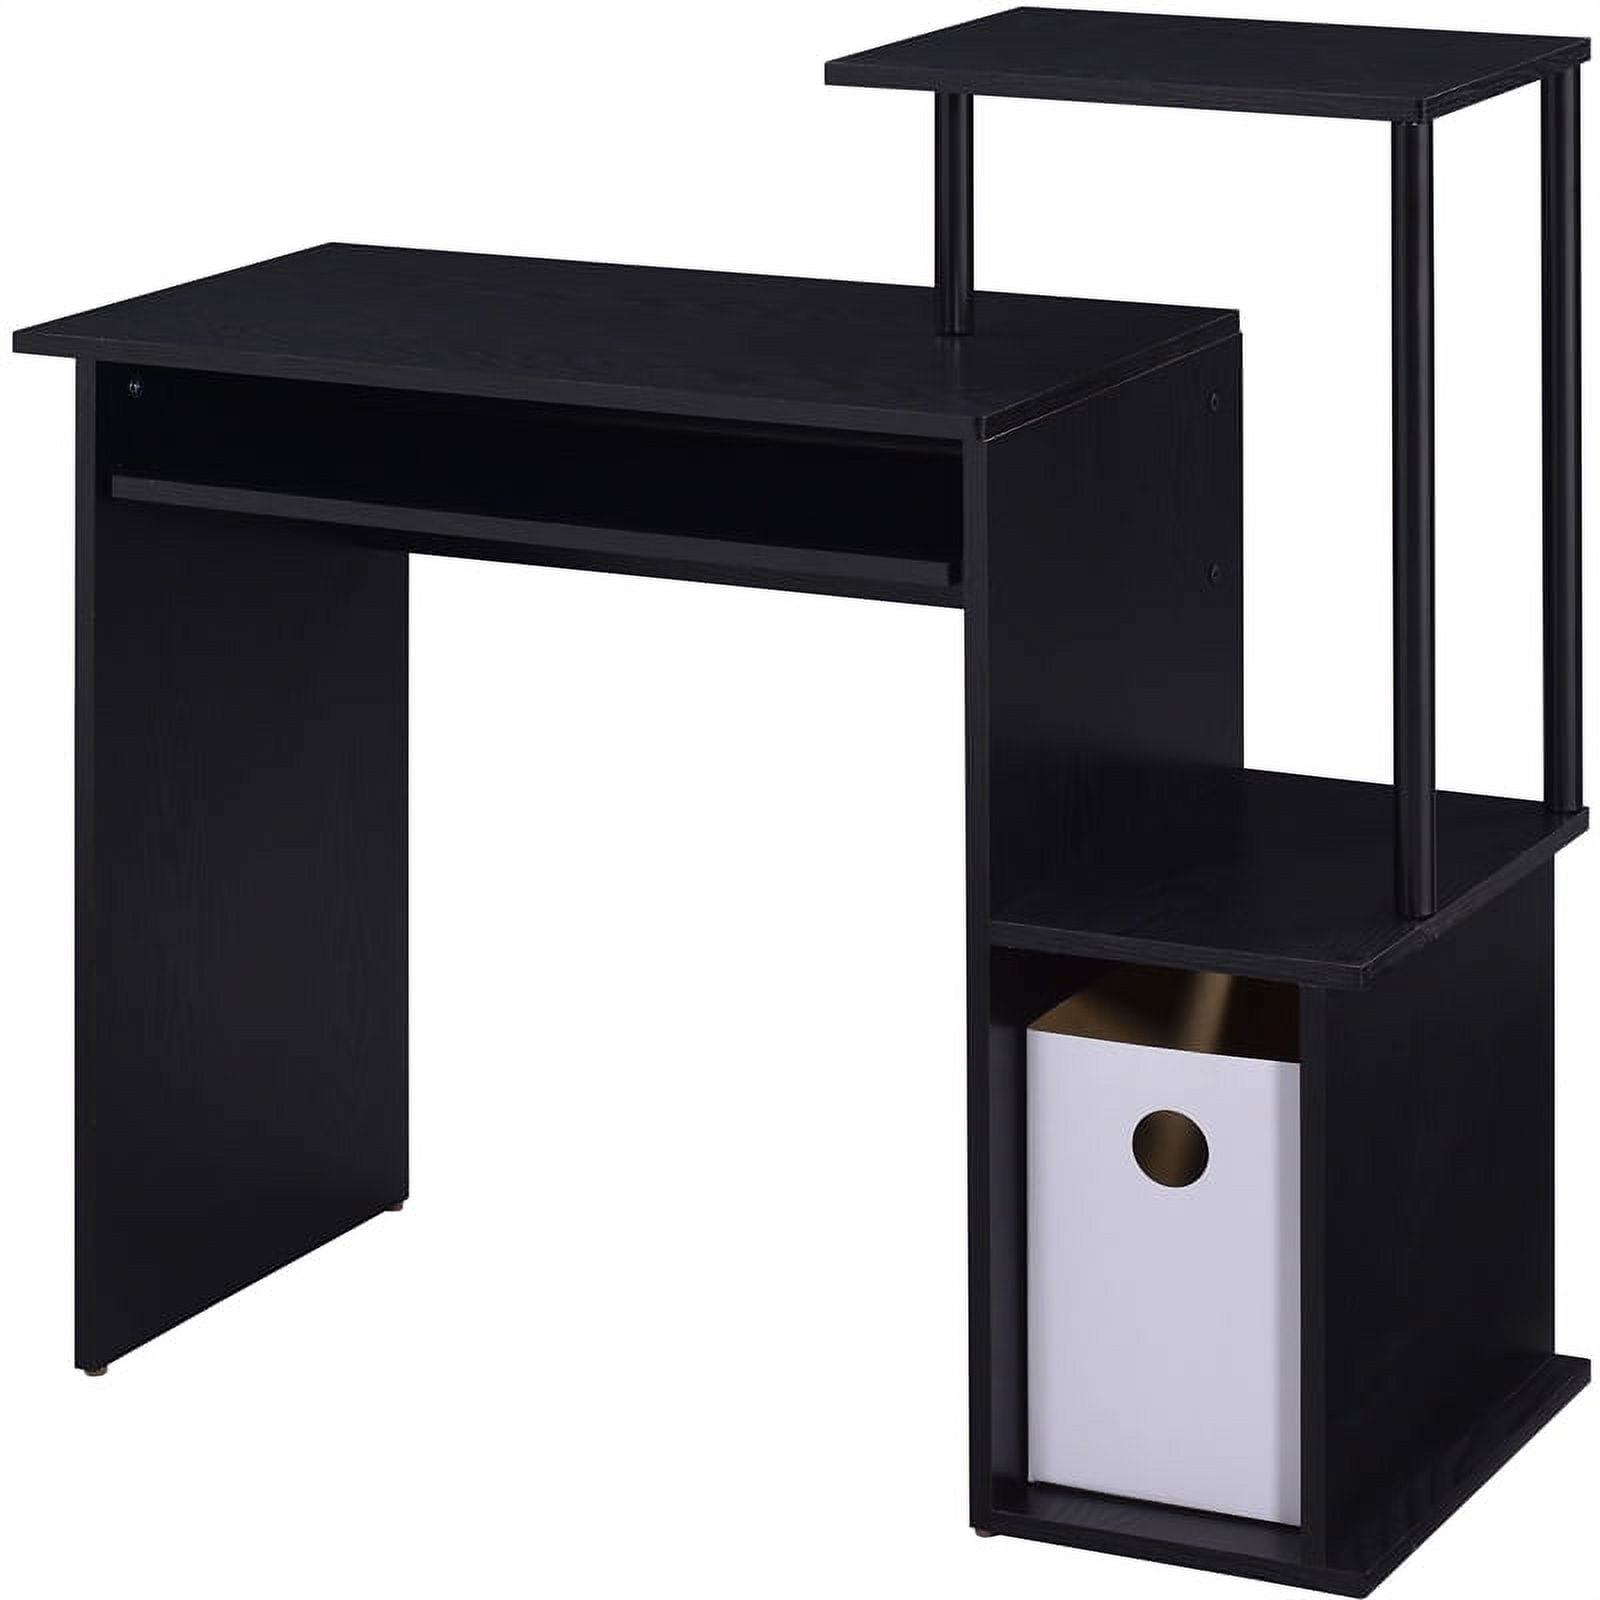 Picture of Acme Furniture 92764 34 x 16 x 37 in. Lyphre Rectangle Desk, Black